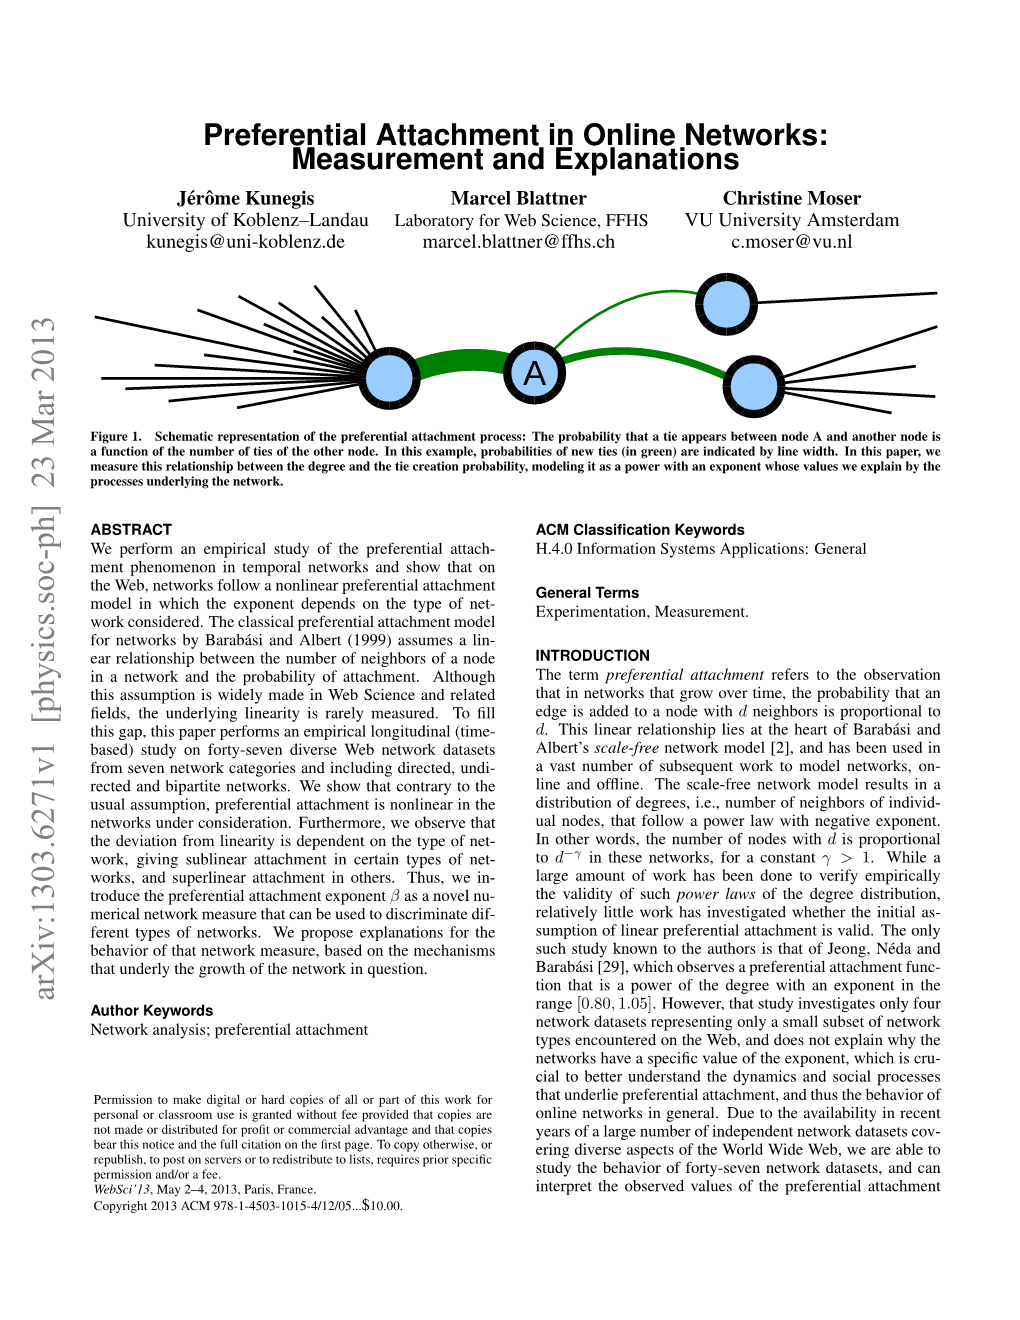 Preferential Attachment in Online Networks: Measurement and Explanations